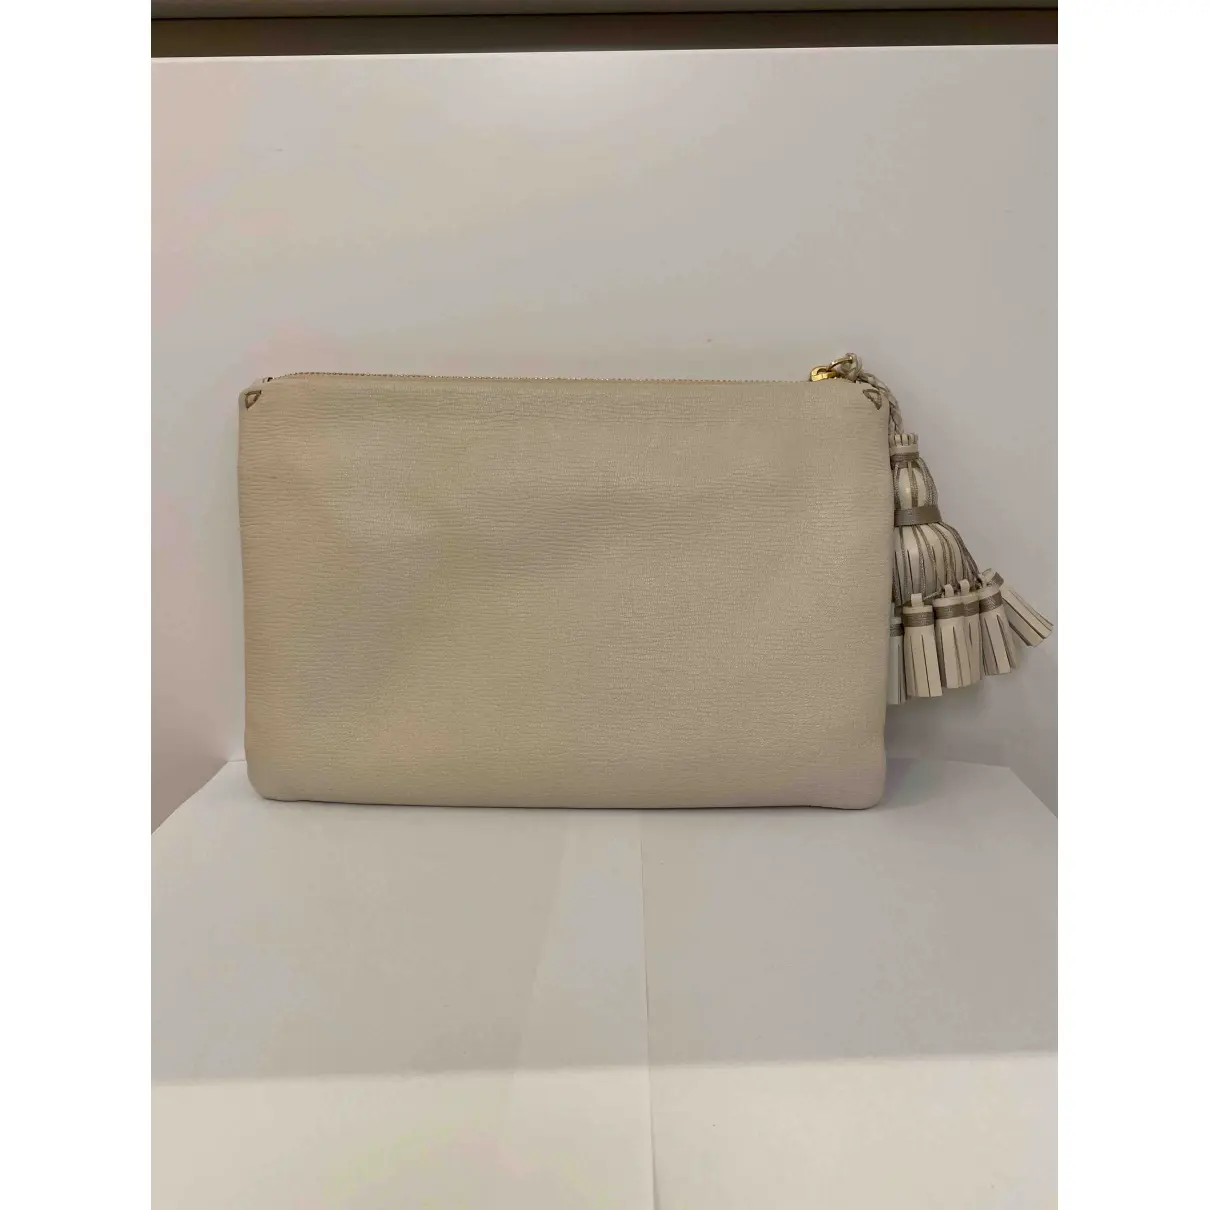 Buy Anya Hindmarch Leather clutch bag online